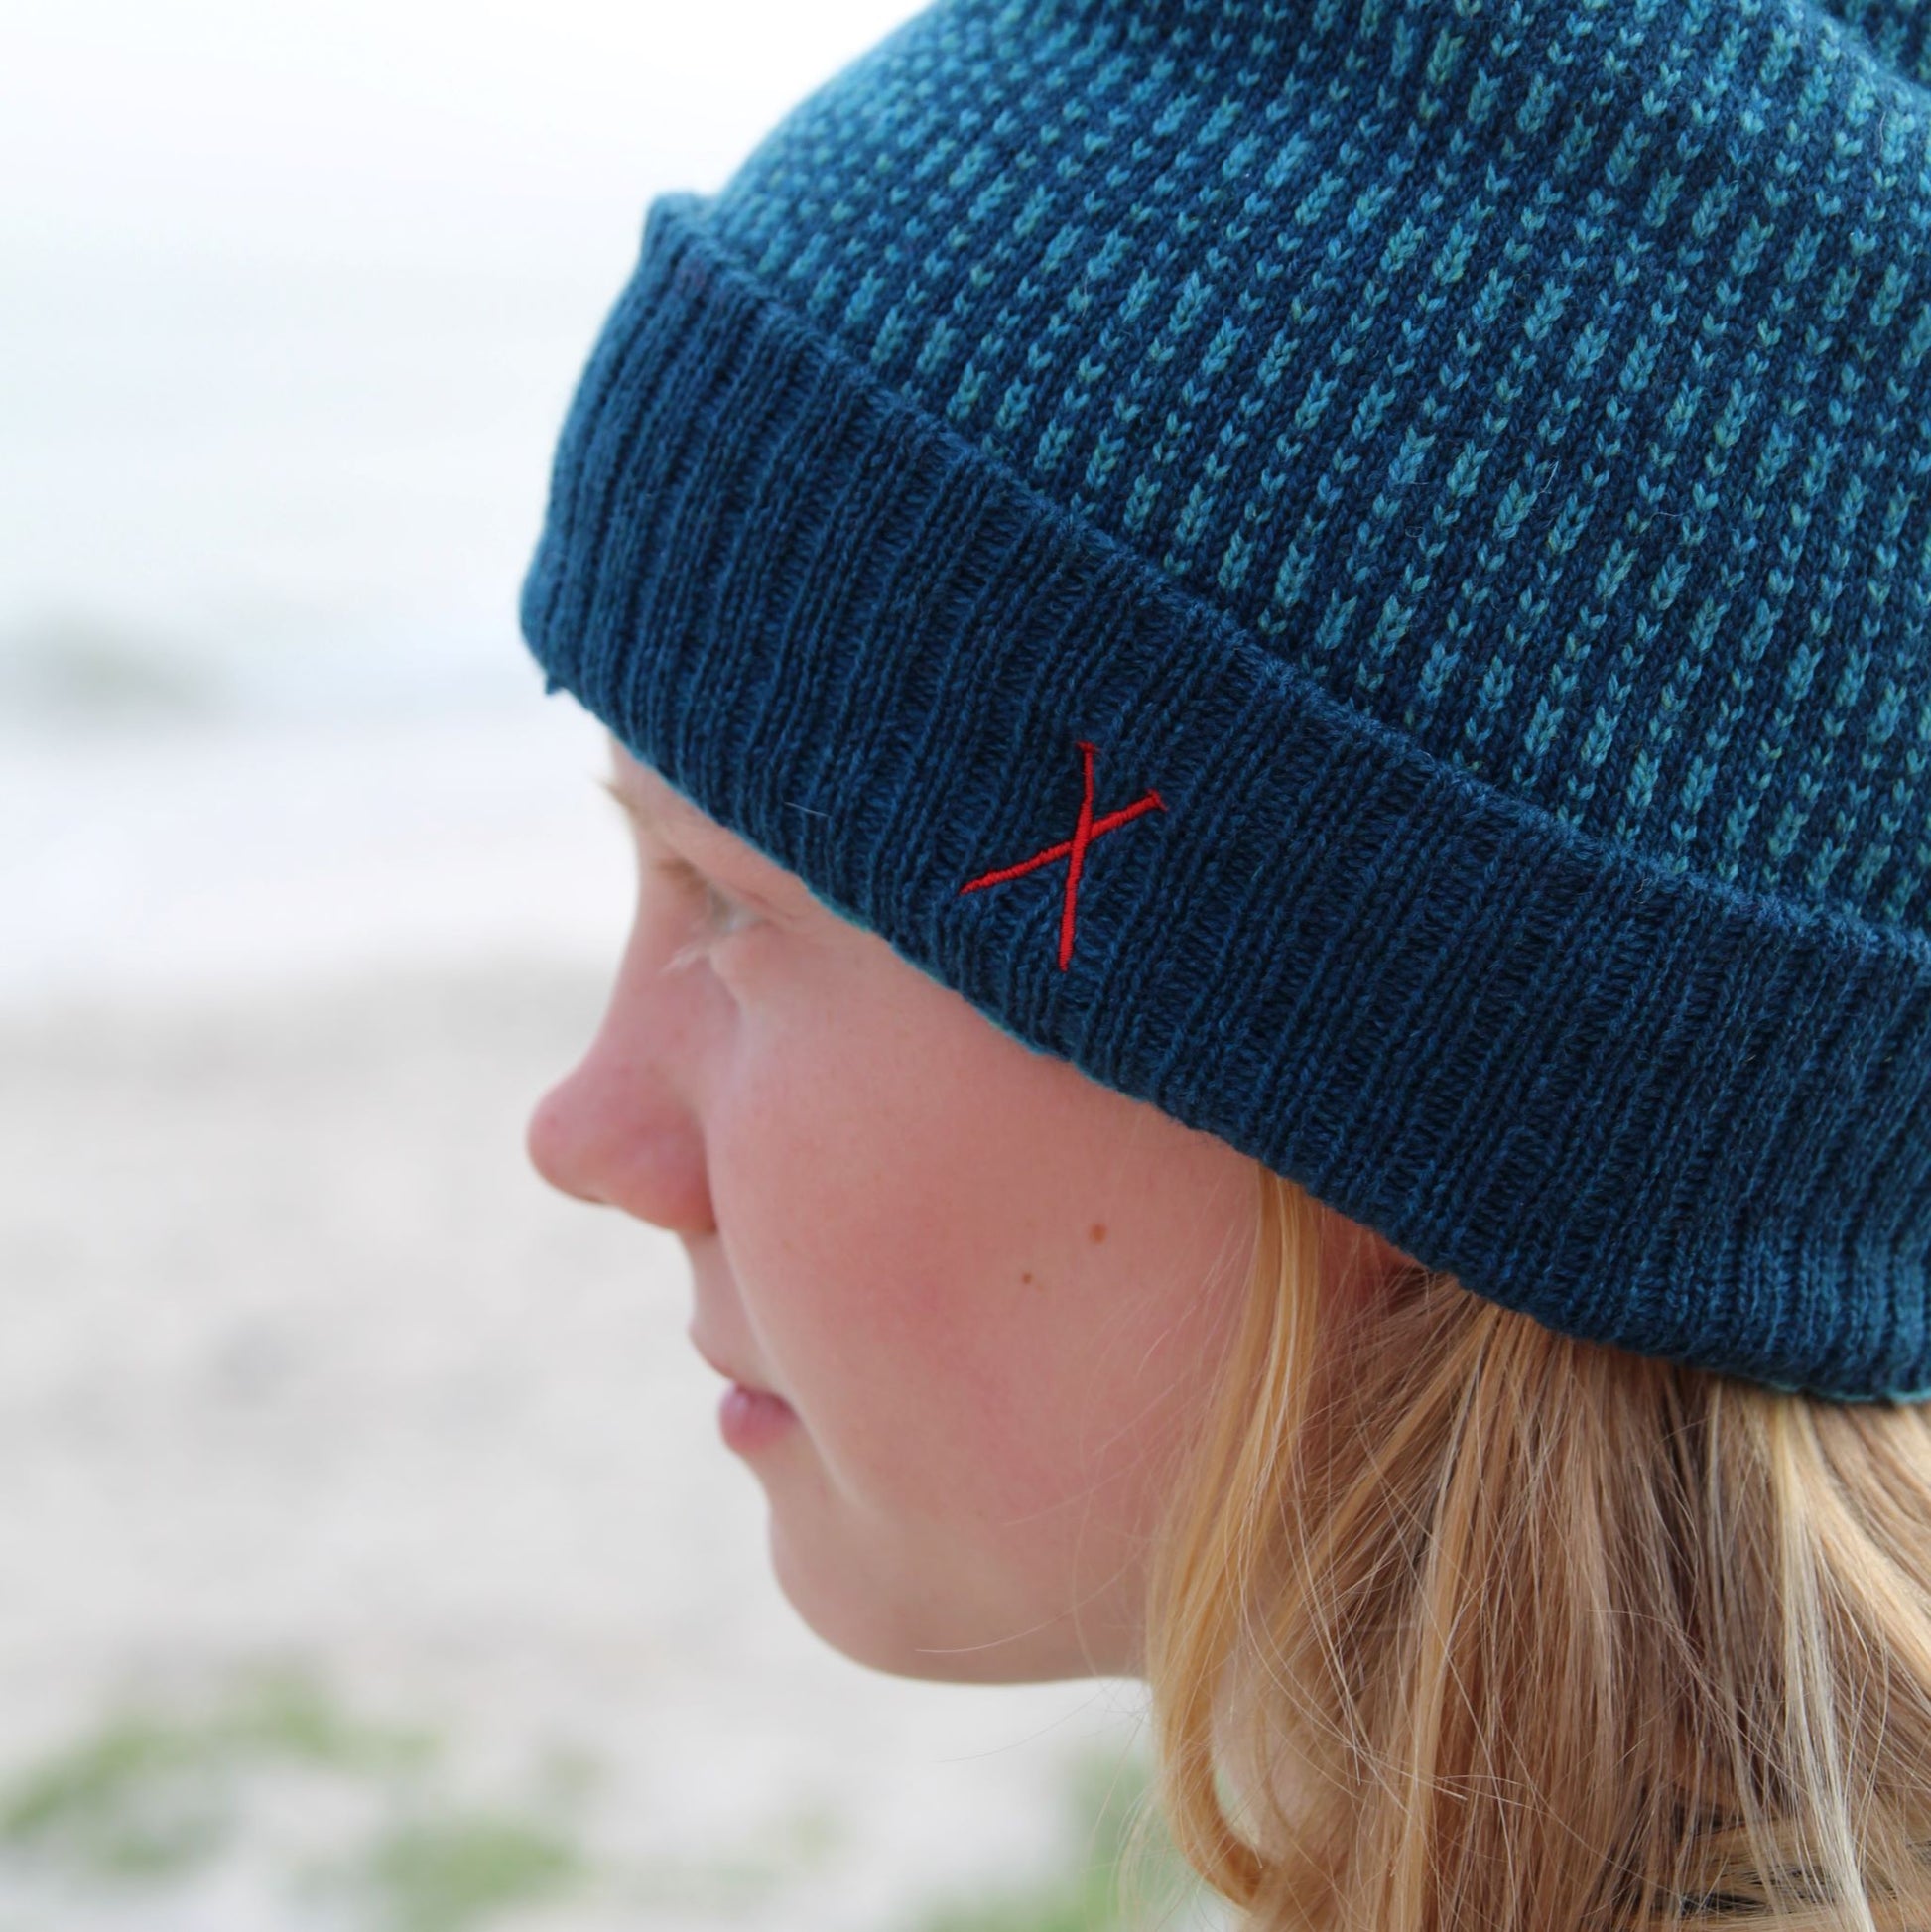 Our knitted woollen hats are made from the finest Merino lamb’s wool. Merino wool has amazing natural properties including being biodegradable, super soft, warm and breathable.